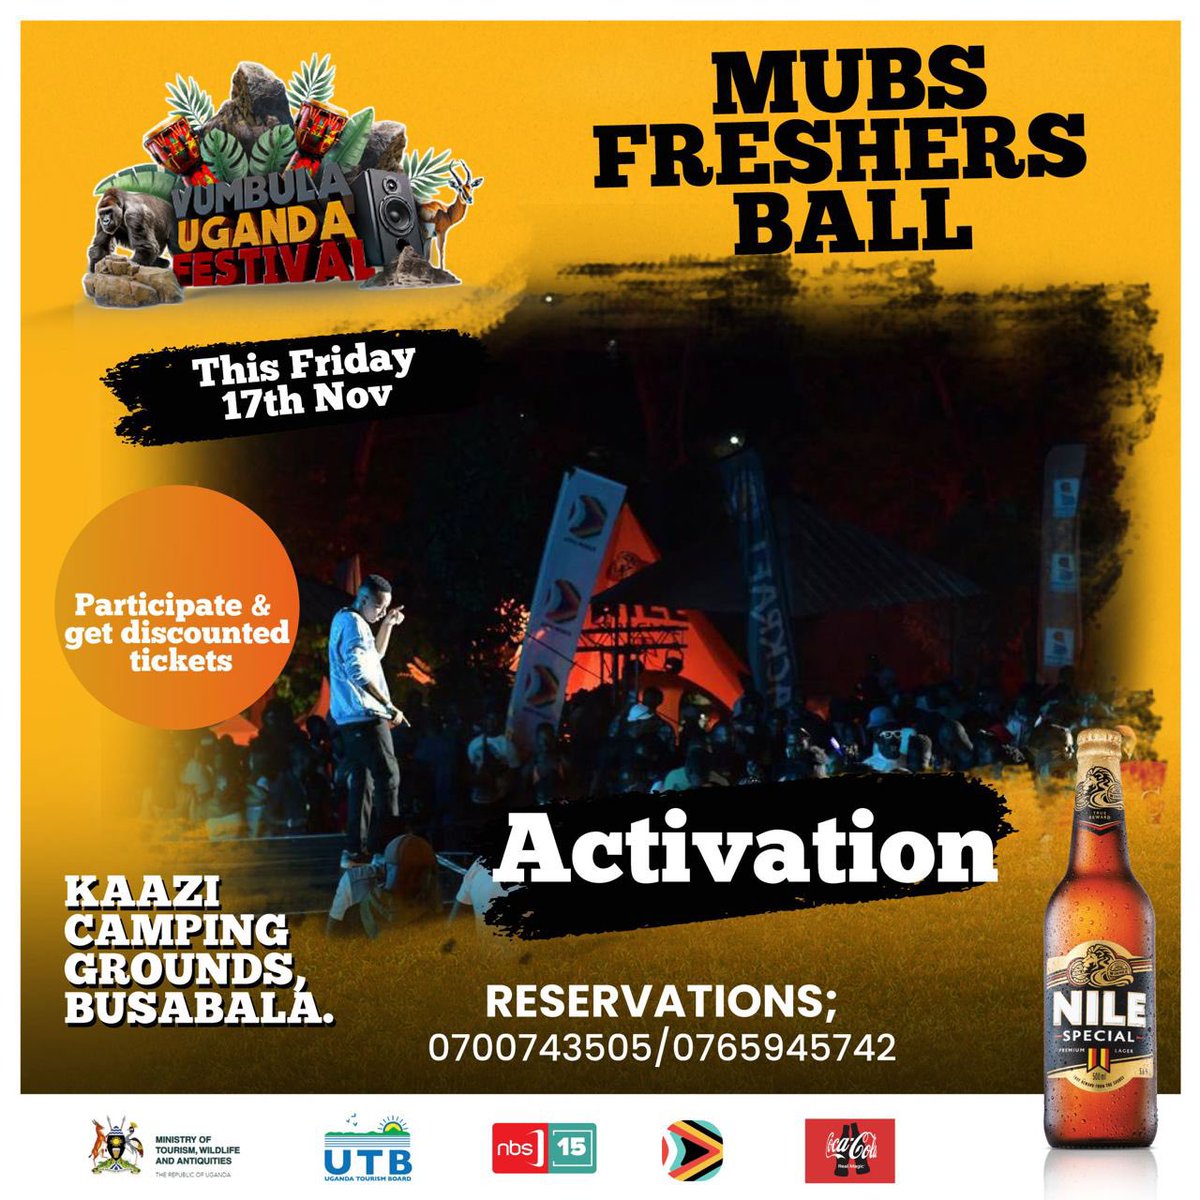 MUBS FRESHERS BALL We are in your hood — tomorrow with some discounted tickets. Don’t miss! #VumbulaUgandaFestival